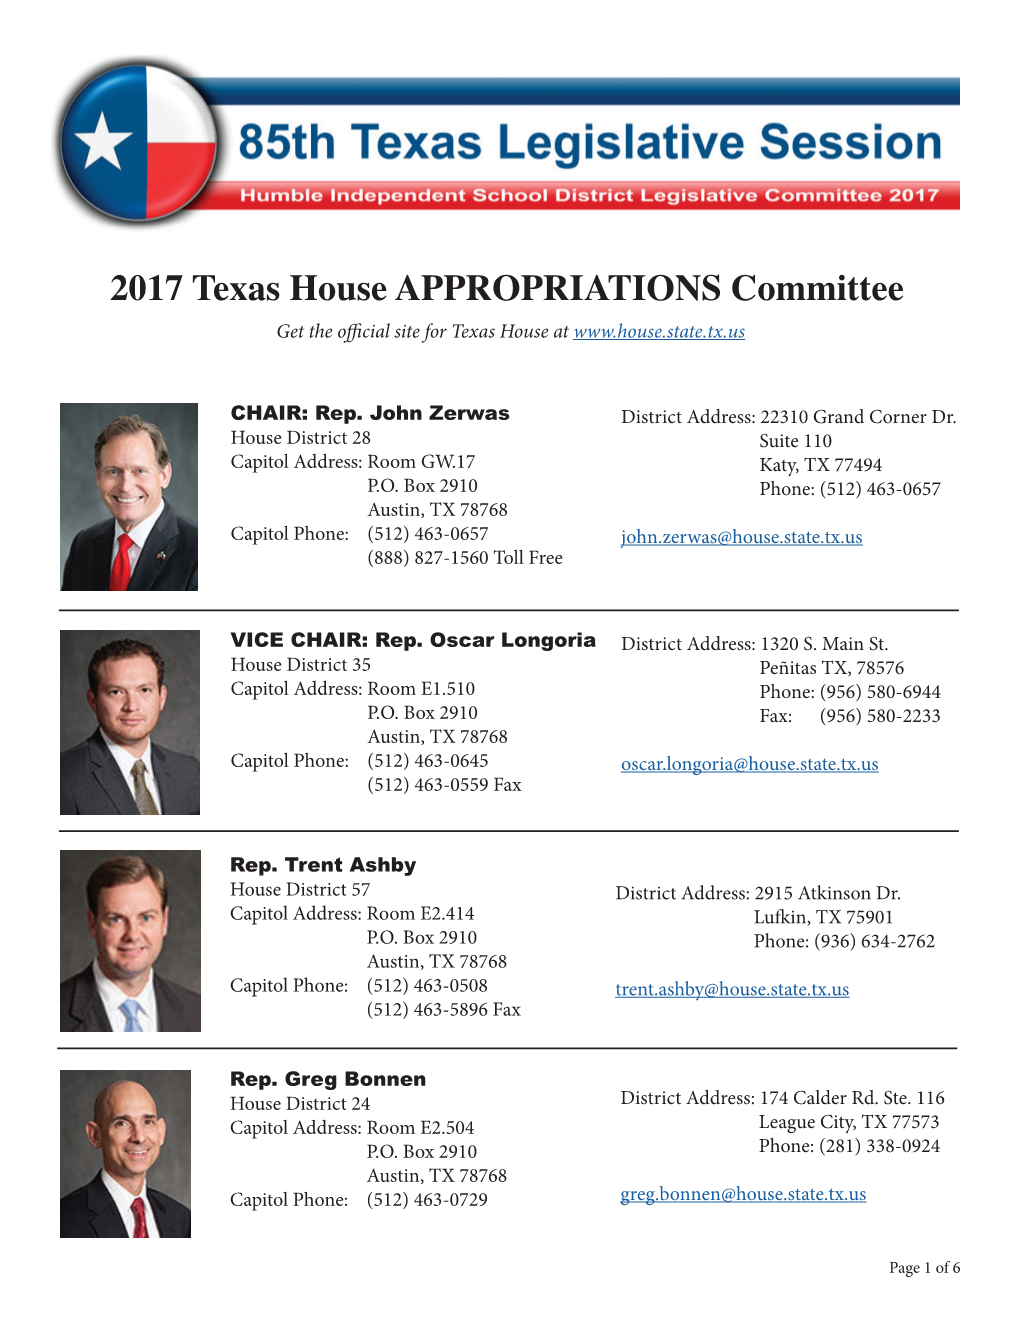 2017 Texas House APPROPRIATIONS Committee Get the Official Site for Texas House At